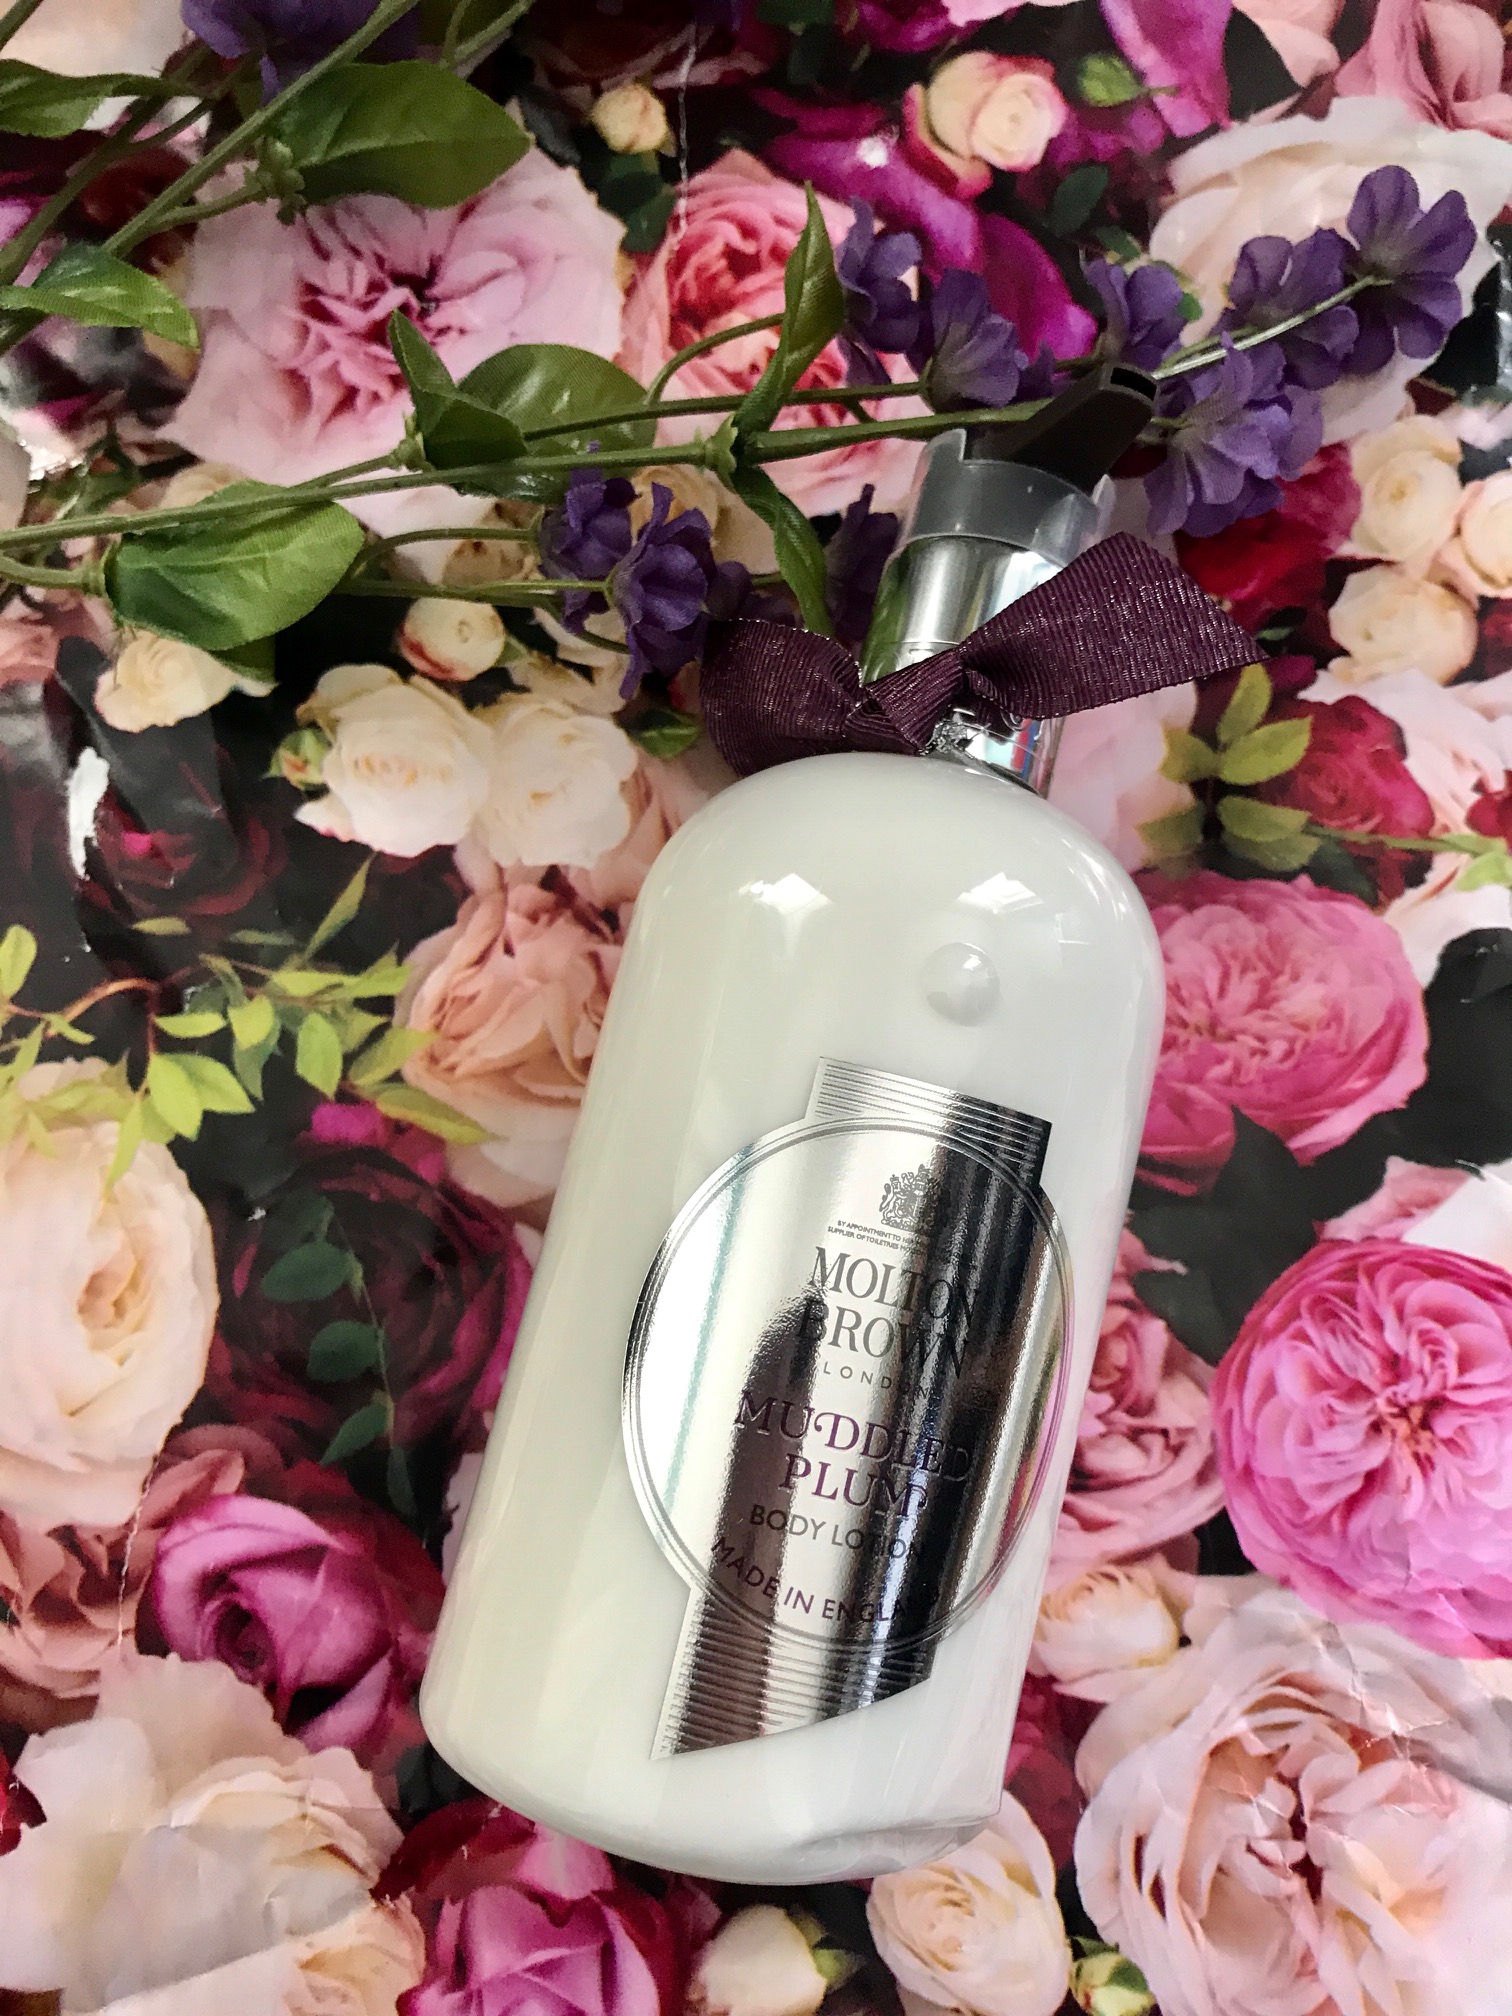 bottle of Molton Brown Muddled Plum Body Lotion against a flowered background, neversaydiebeauty.com